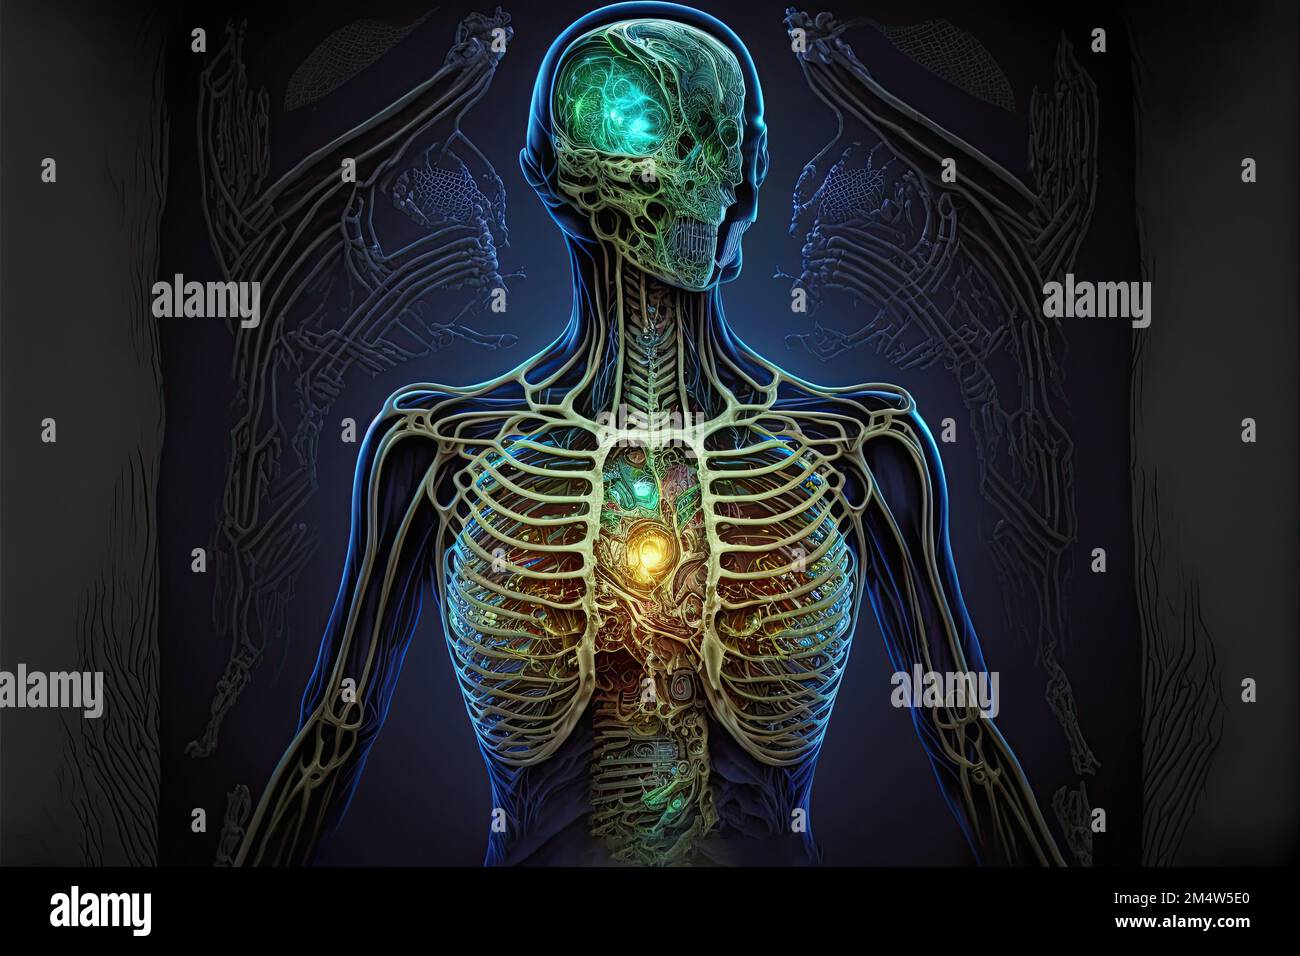 Sci-fi skeleton of an alien autopsy with a glowing heart in his chest, cyberpunk psychedelic body scan of extraterrestrial anatomy. High-tech Stock Photo